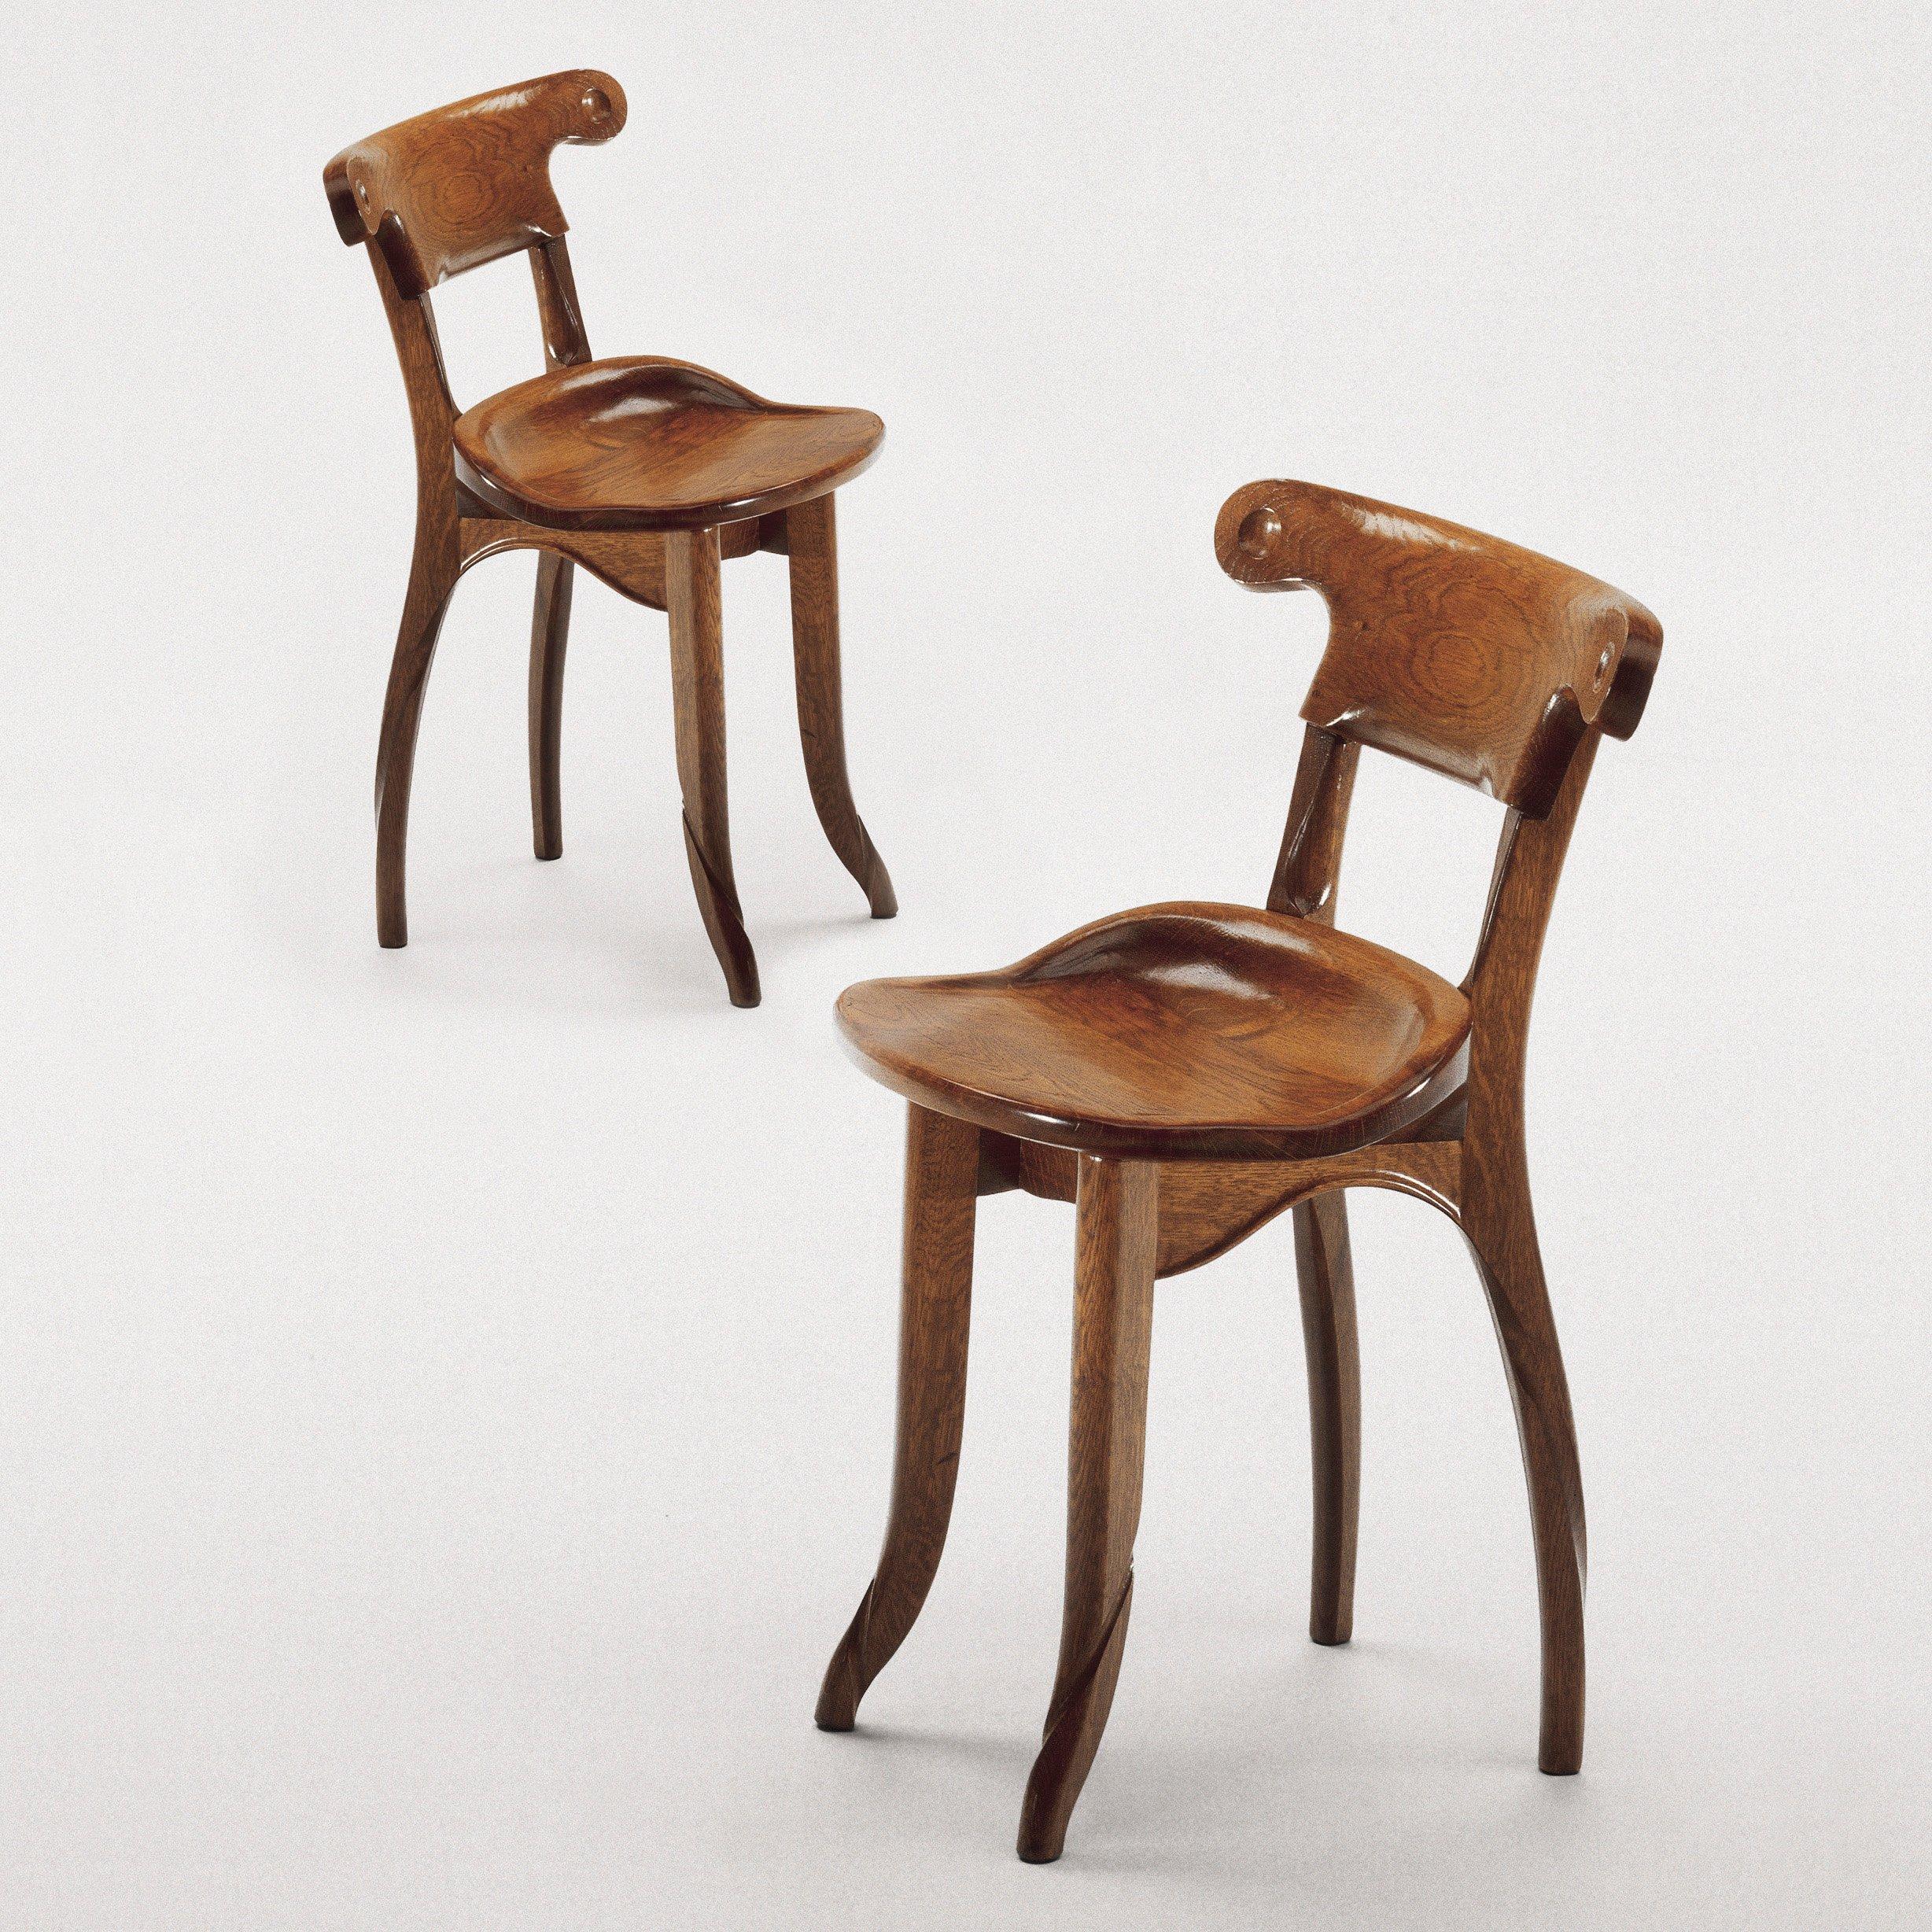 Batllo chairs designed by Antoni Gaudi, circa 1906.
Manufactured by BD furniture in Barcelona.

Solid varnished oak
Measures: 47 x 52 x 74 H cm.
      